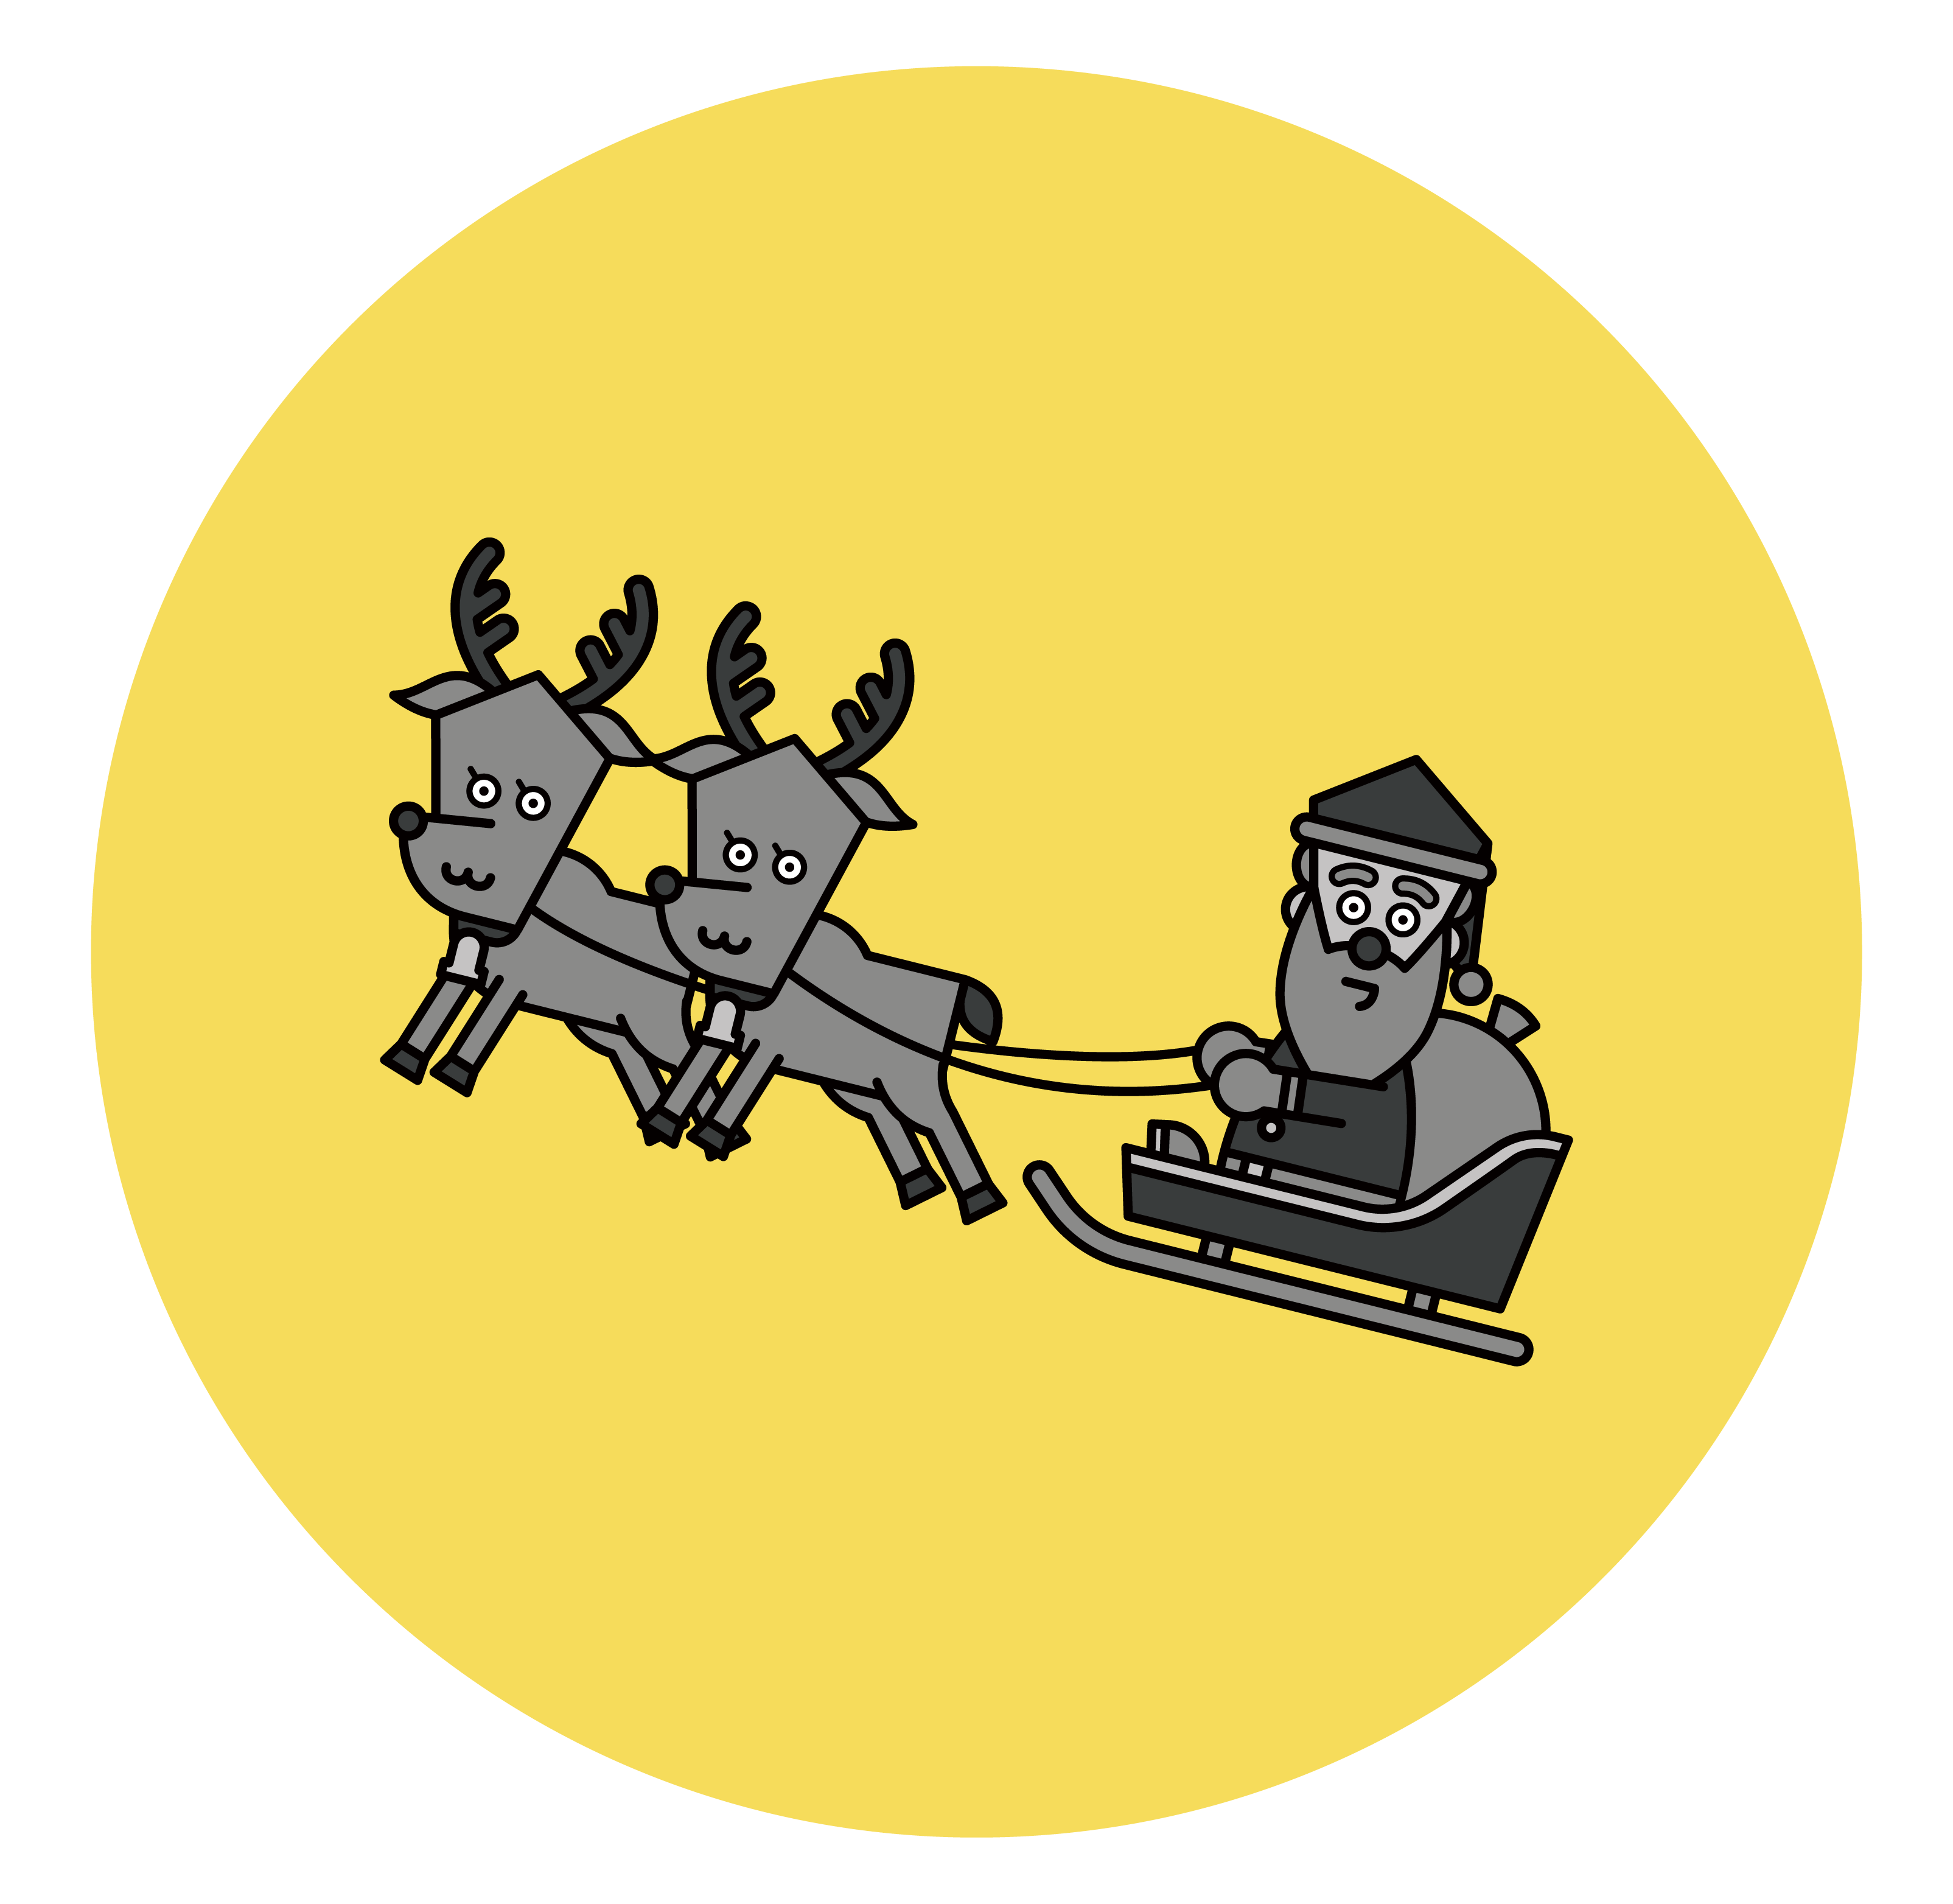 Illustration of Santa Claus running in front of the moon with a sleigh